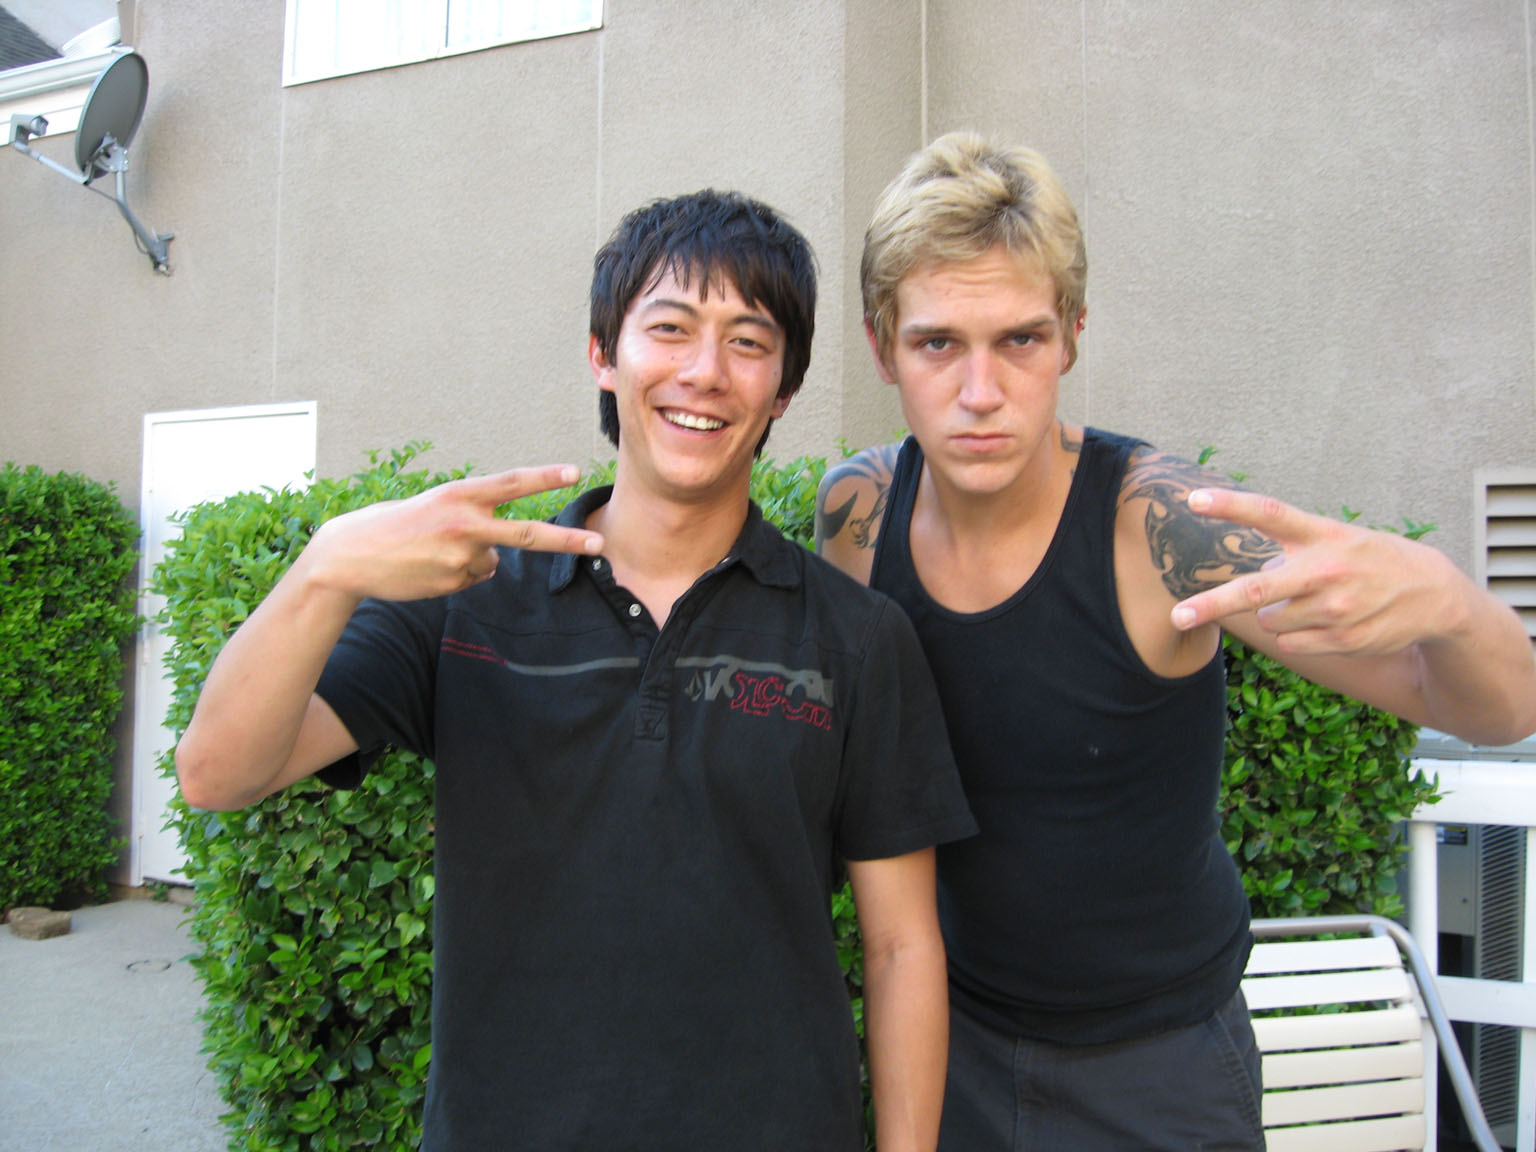 With Jason Mewes